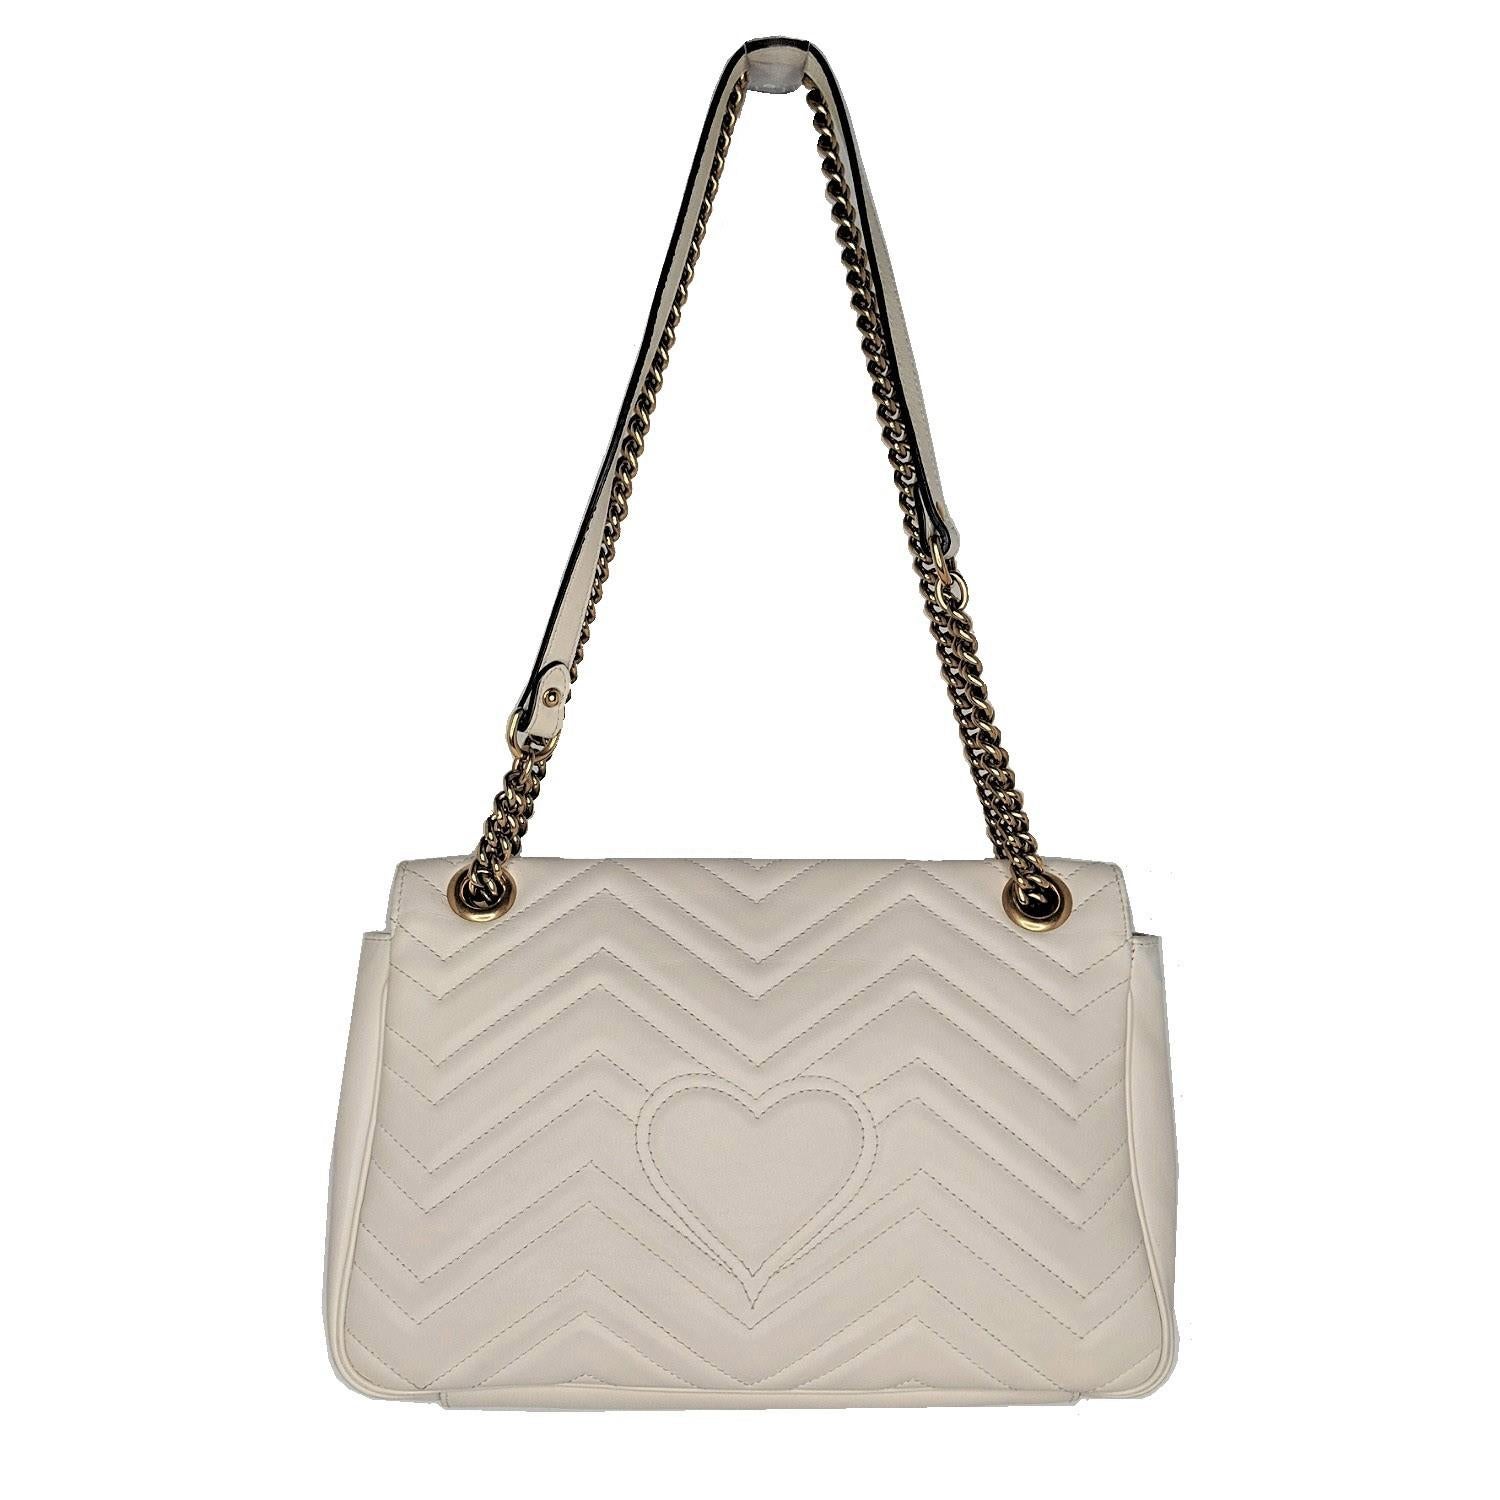 White Matelassé leather Gucci Large GG Marmont crossbody bag with antiqued gold-tone hardware, single convertible chain-link shoulder strap with leather shoulder guard, peach suede lining, three interior pockets; one with zip closure and push-lock